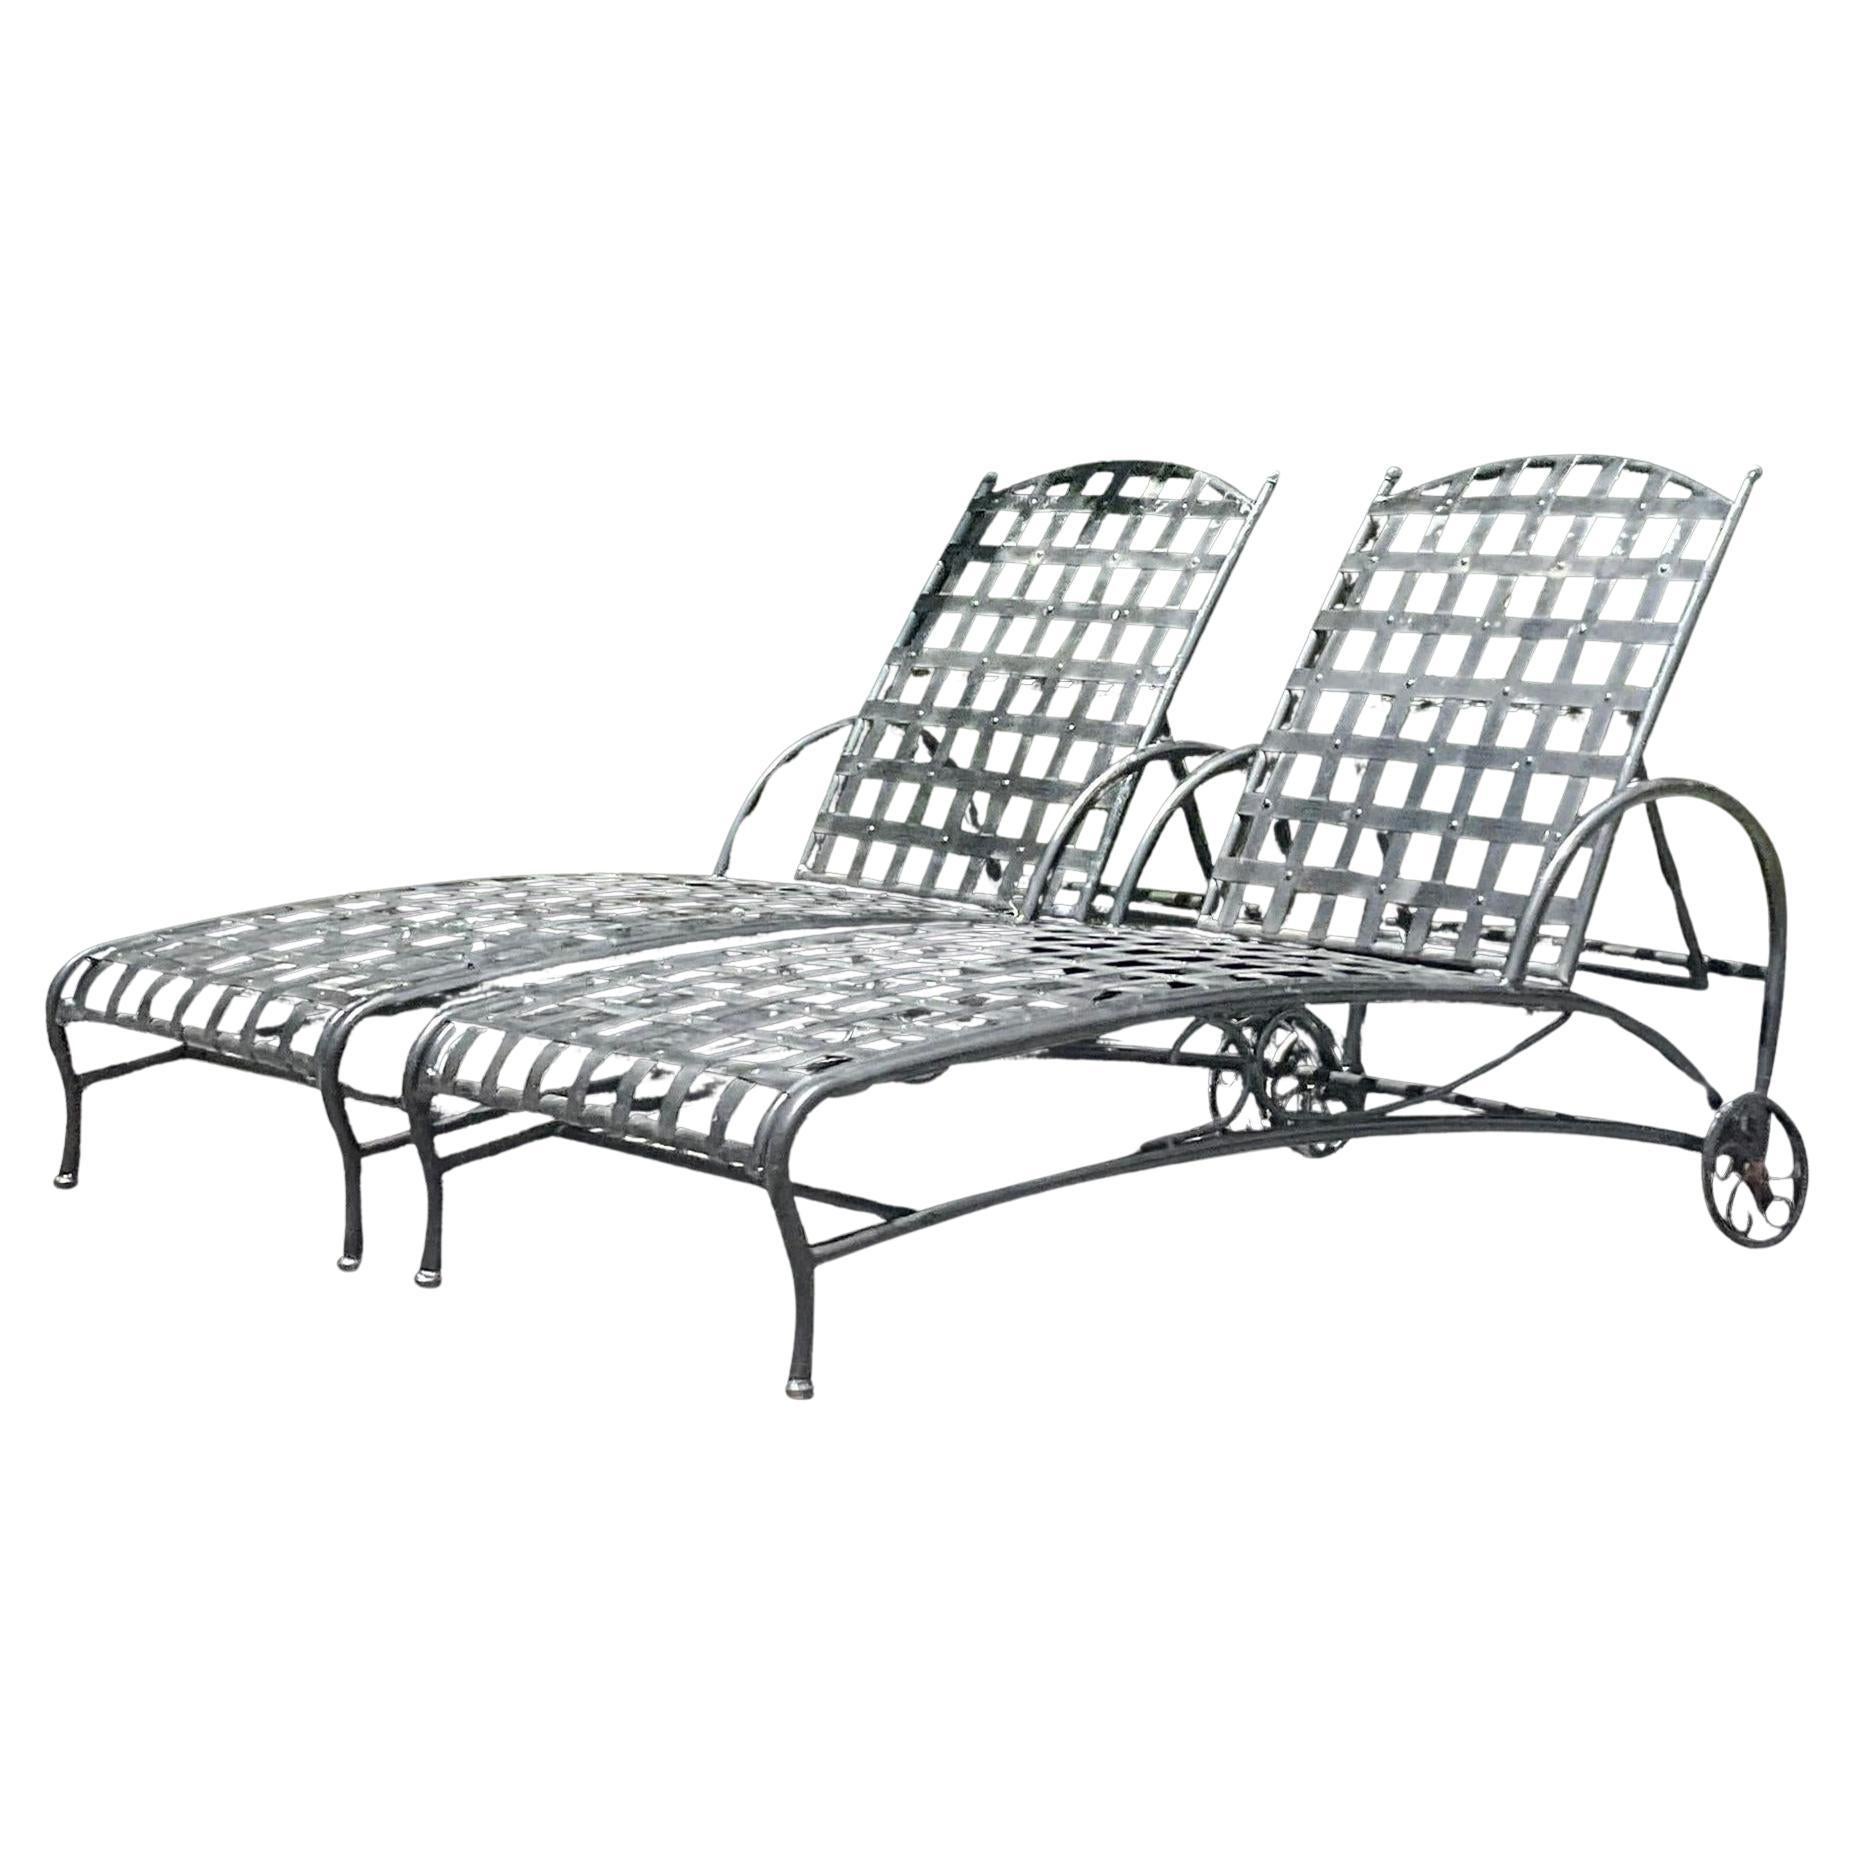 Vintage Boho Wrought Iron Chaise Lounge Chairs - a Pair For Sale